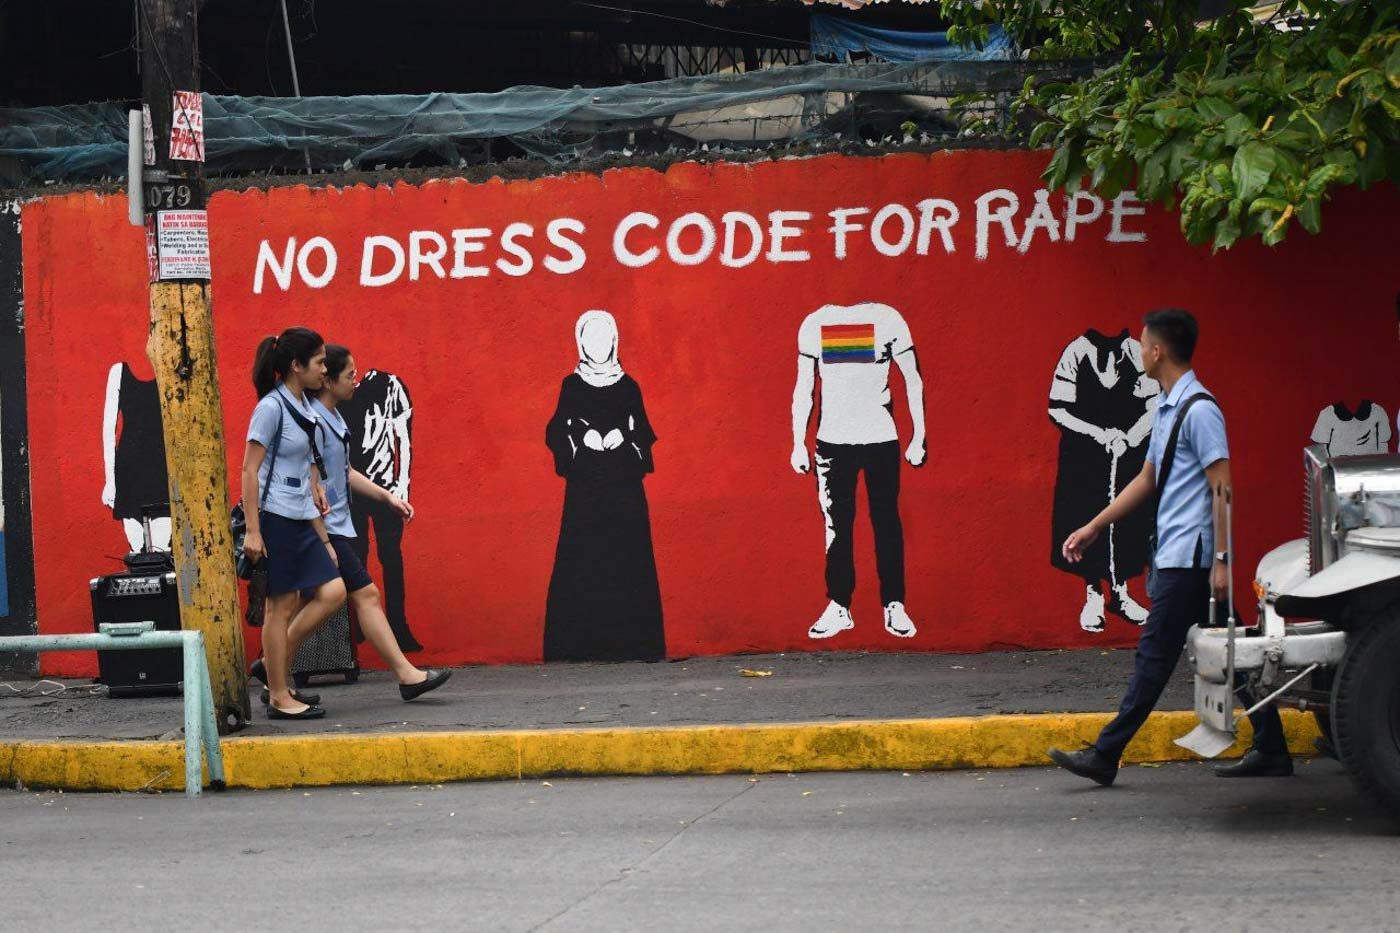 IN PHOTOS: Mural shows there is ‘no dress code for rape’